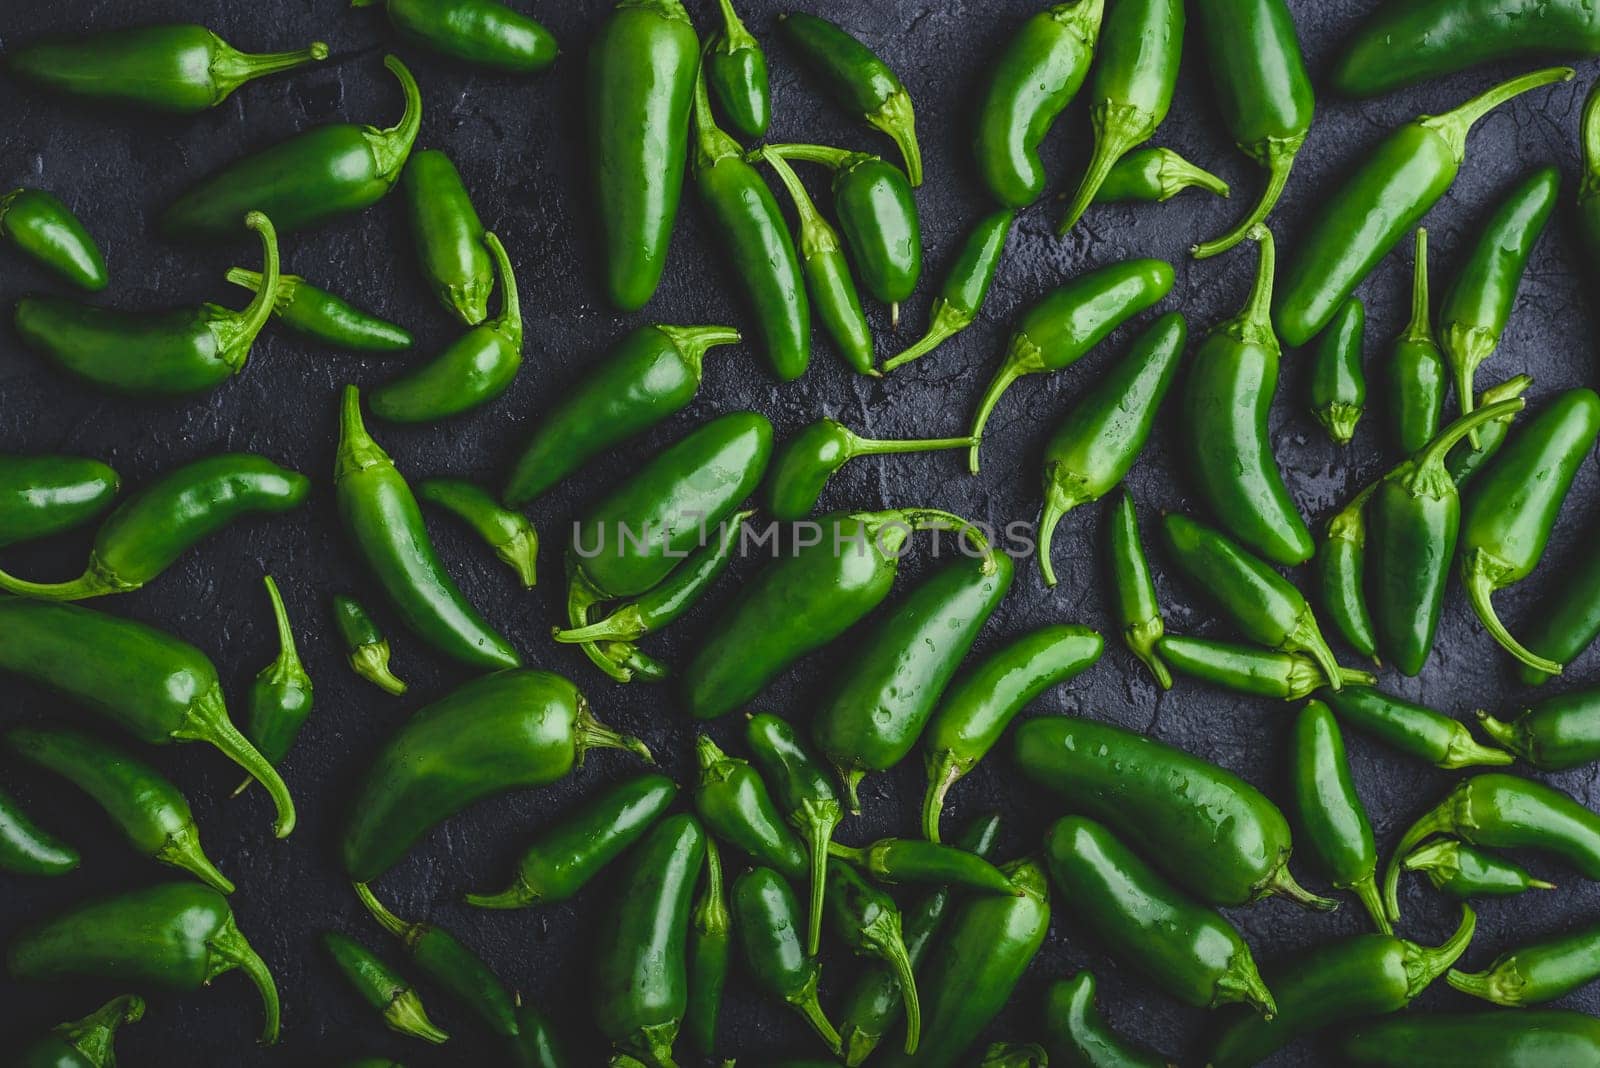 Top View of Green Jalapeno Peppers on Black Concrete Background